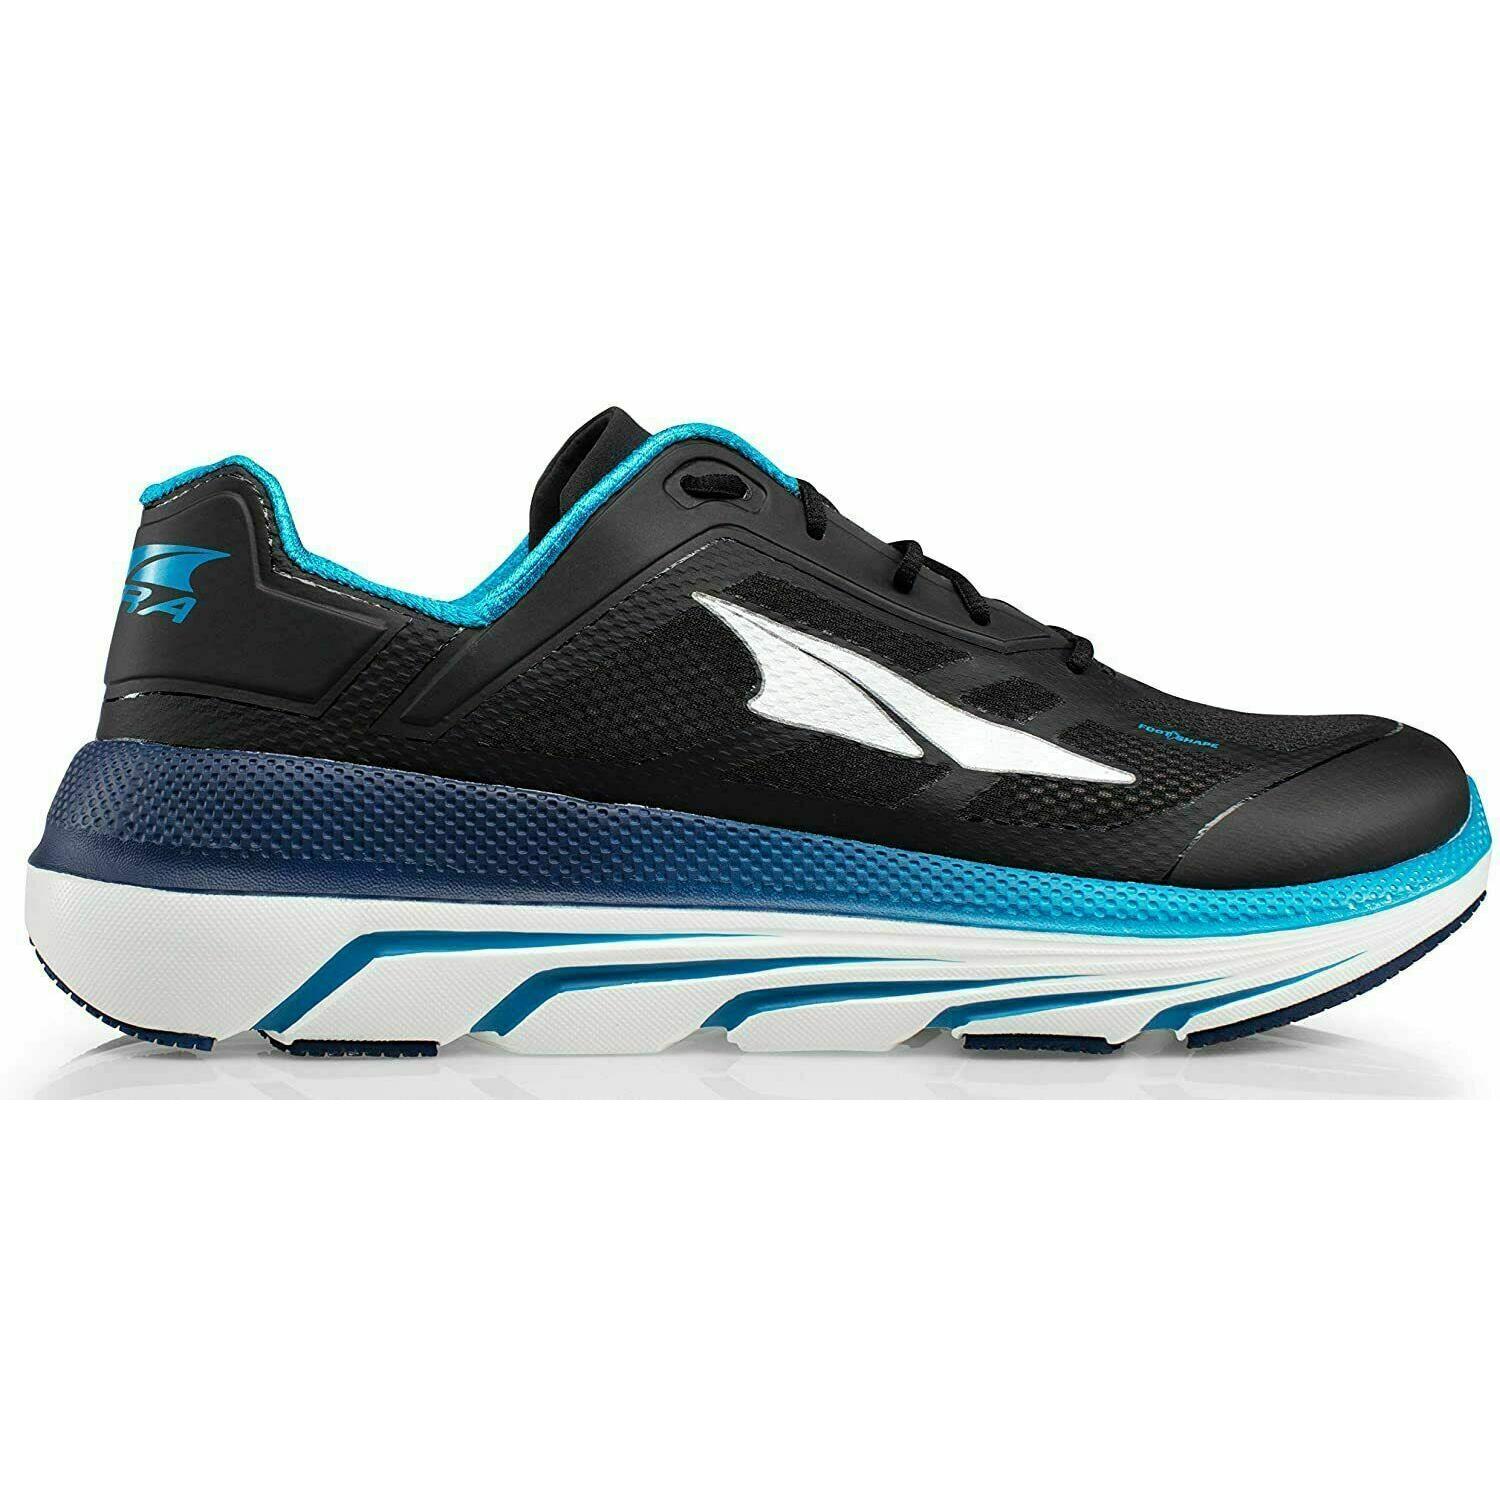 Altra AFM1838F Duo Road Running Shoe